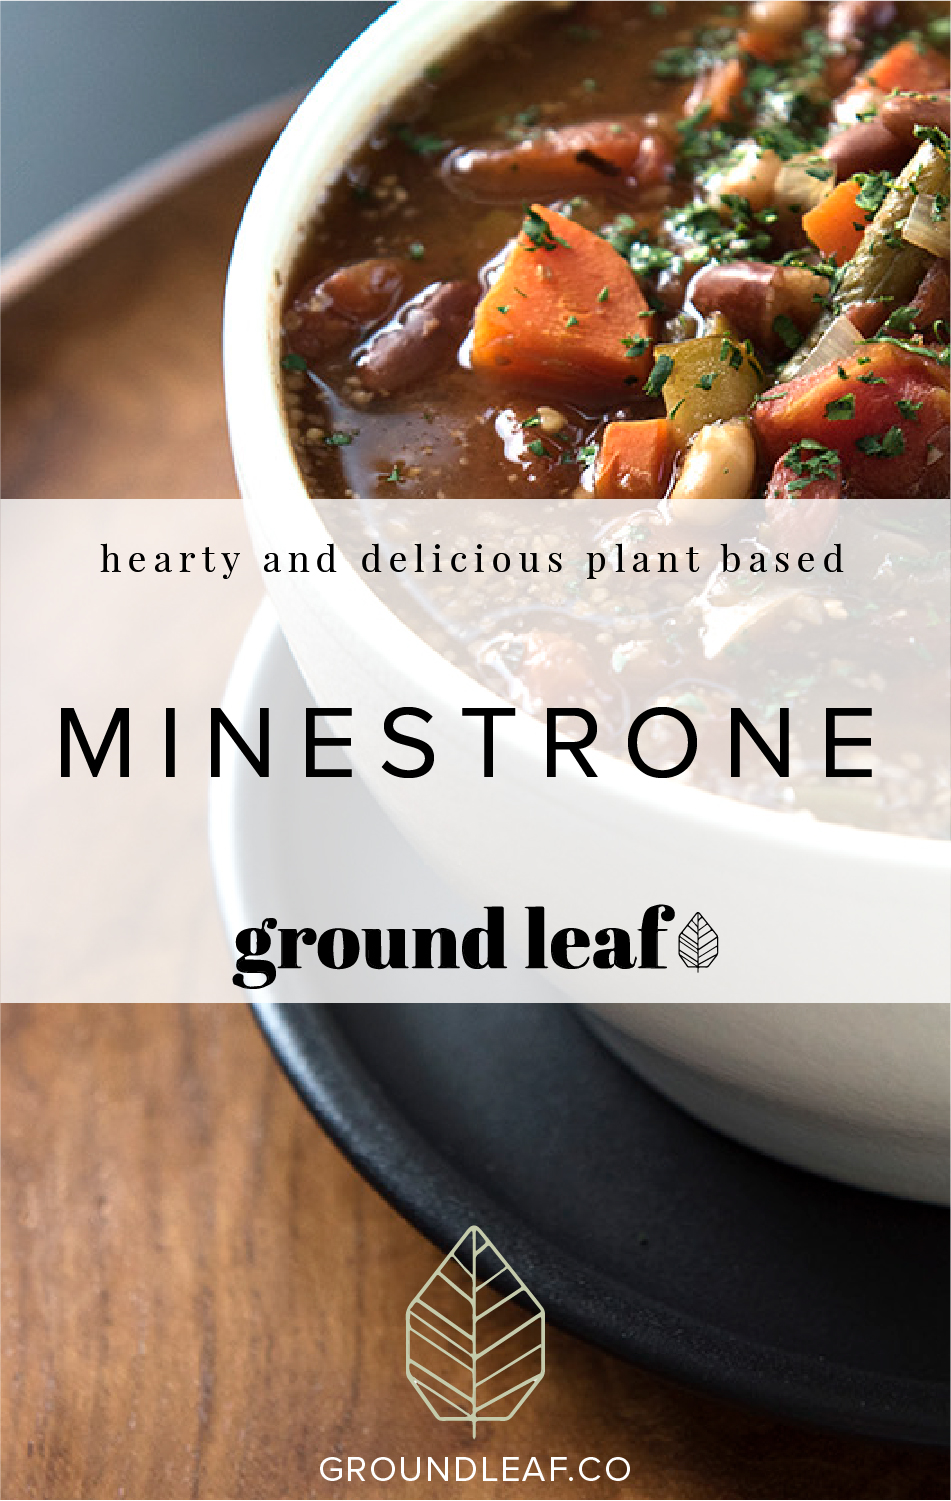 Minestrone soup reminiscent of the famous Olive Garden version. A full meal in itself packed with beans, veggies, and flavor! All plant based, vegan and made in the instant pot!